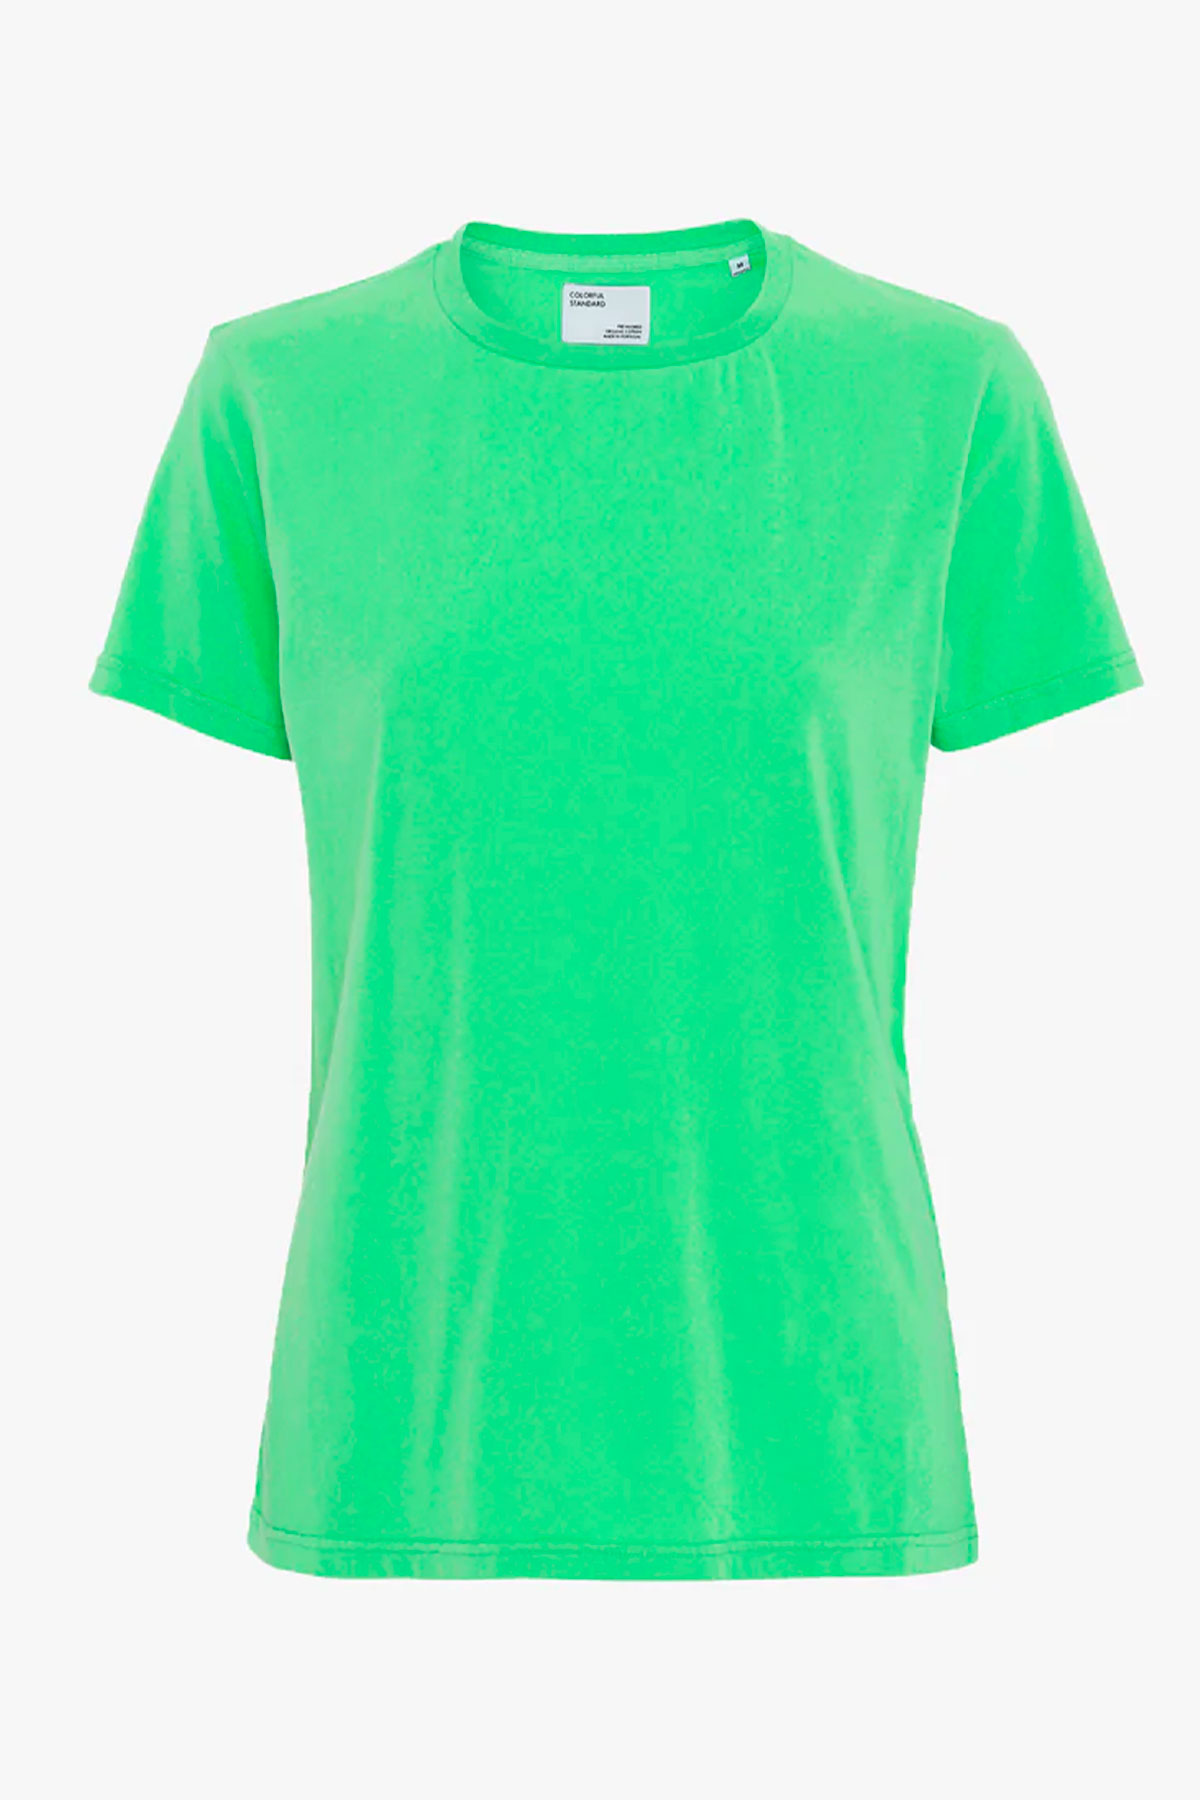 colorful standard t shirt spring green